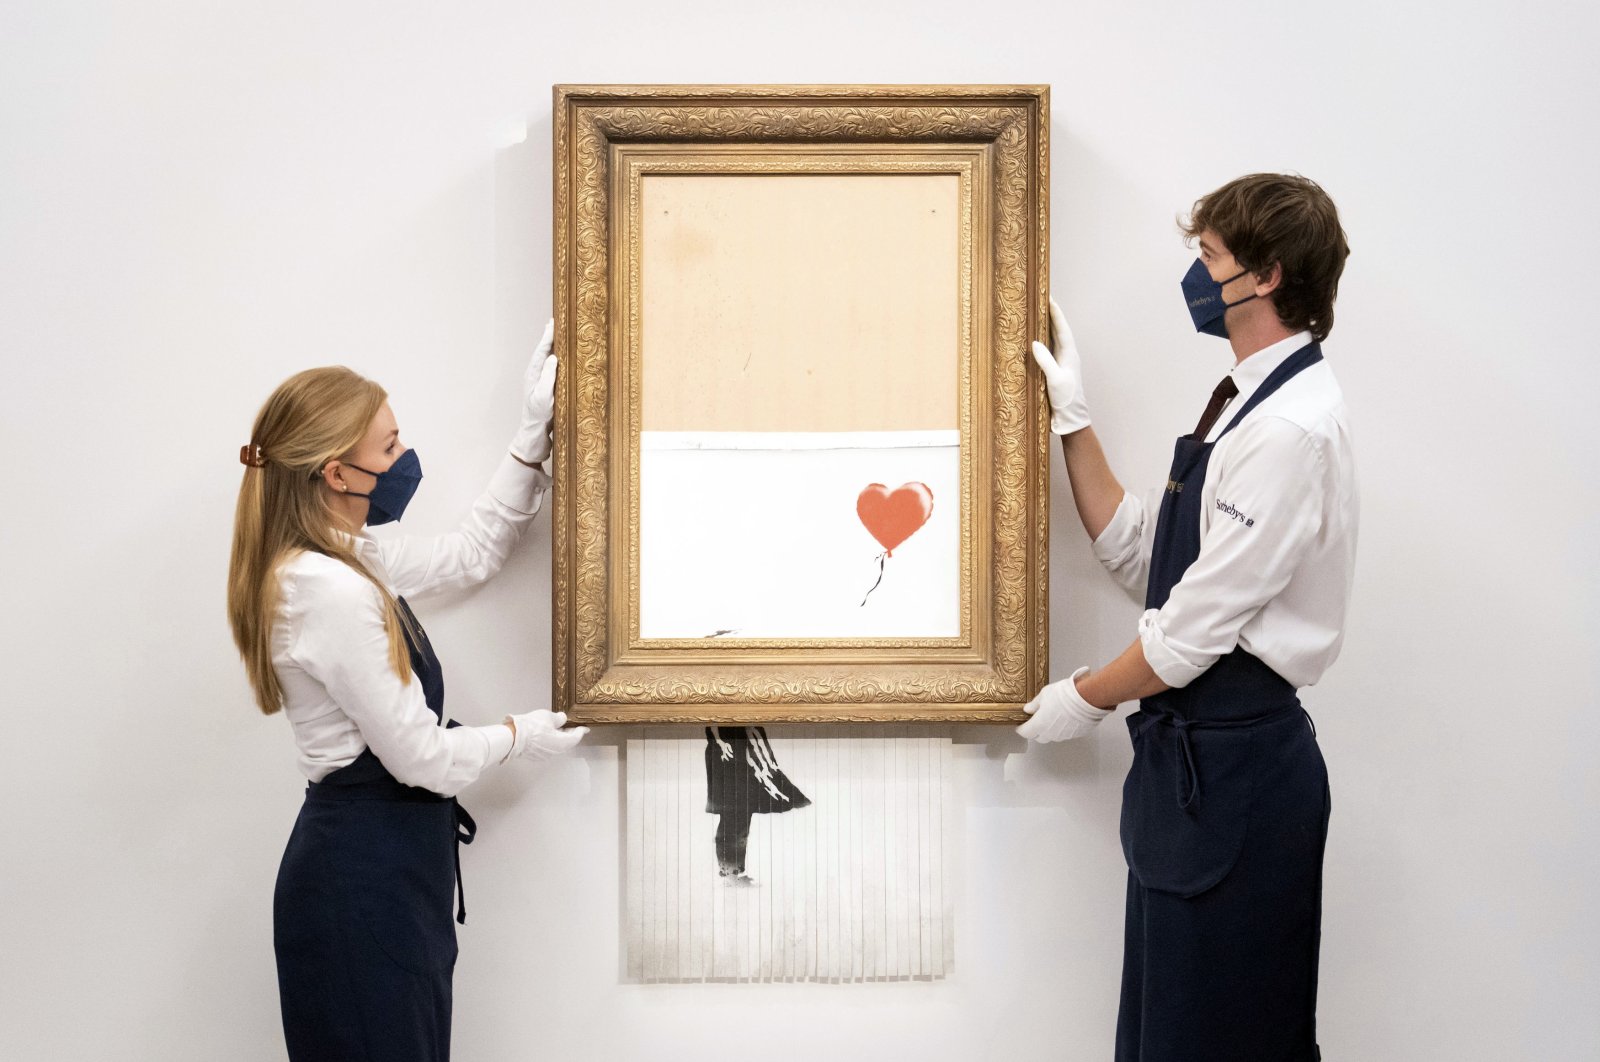 Art handlers at Sotheby's auction house hold Banksy's “Love is in the Bin,” before it returns to auction at Sotheby's, London, U.K., Sept. 3, 2021. (AP Photo)